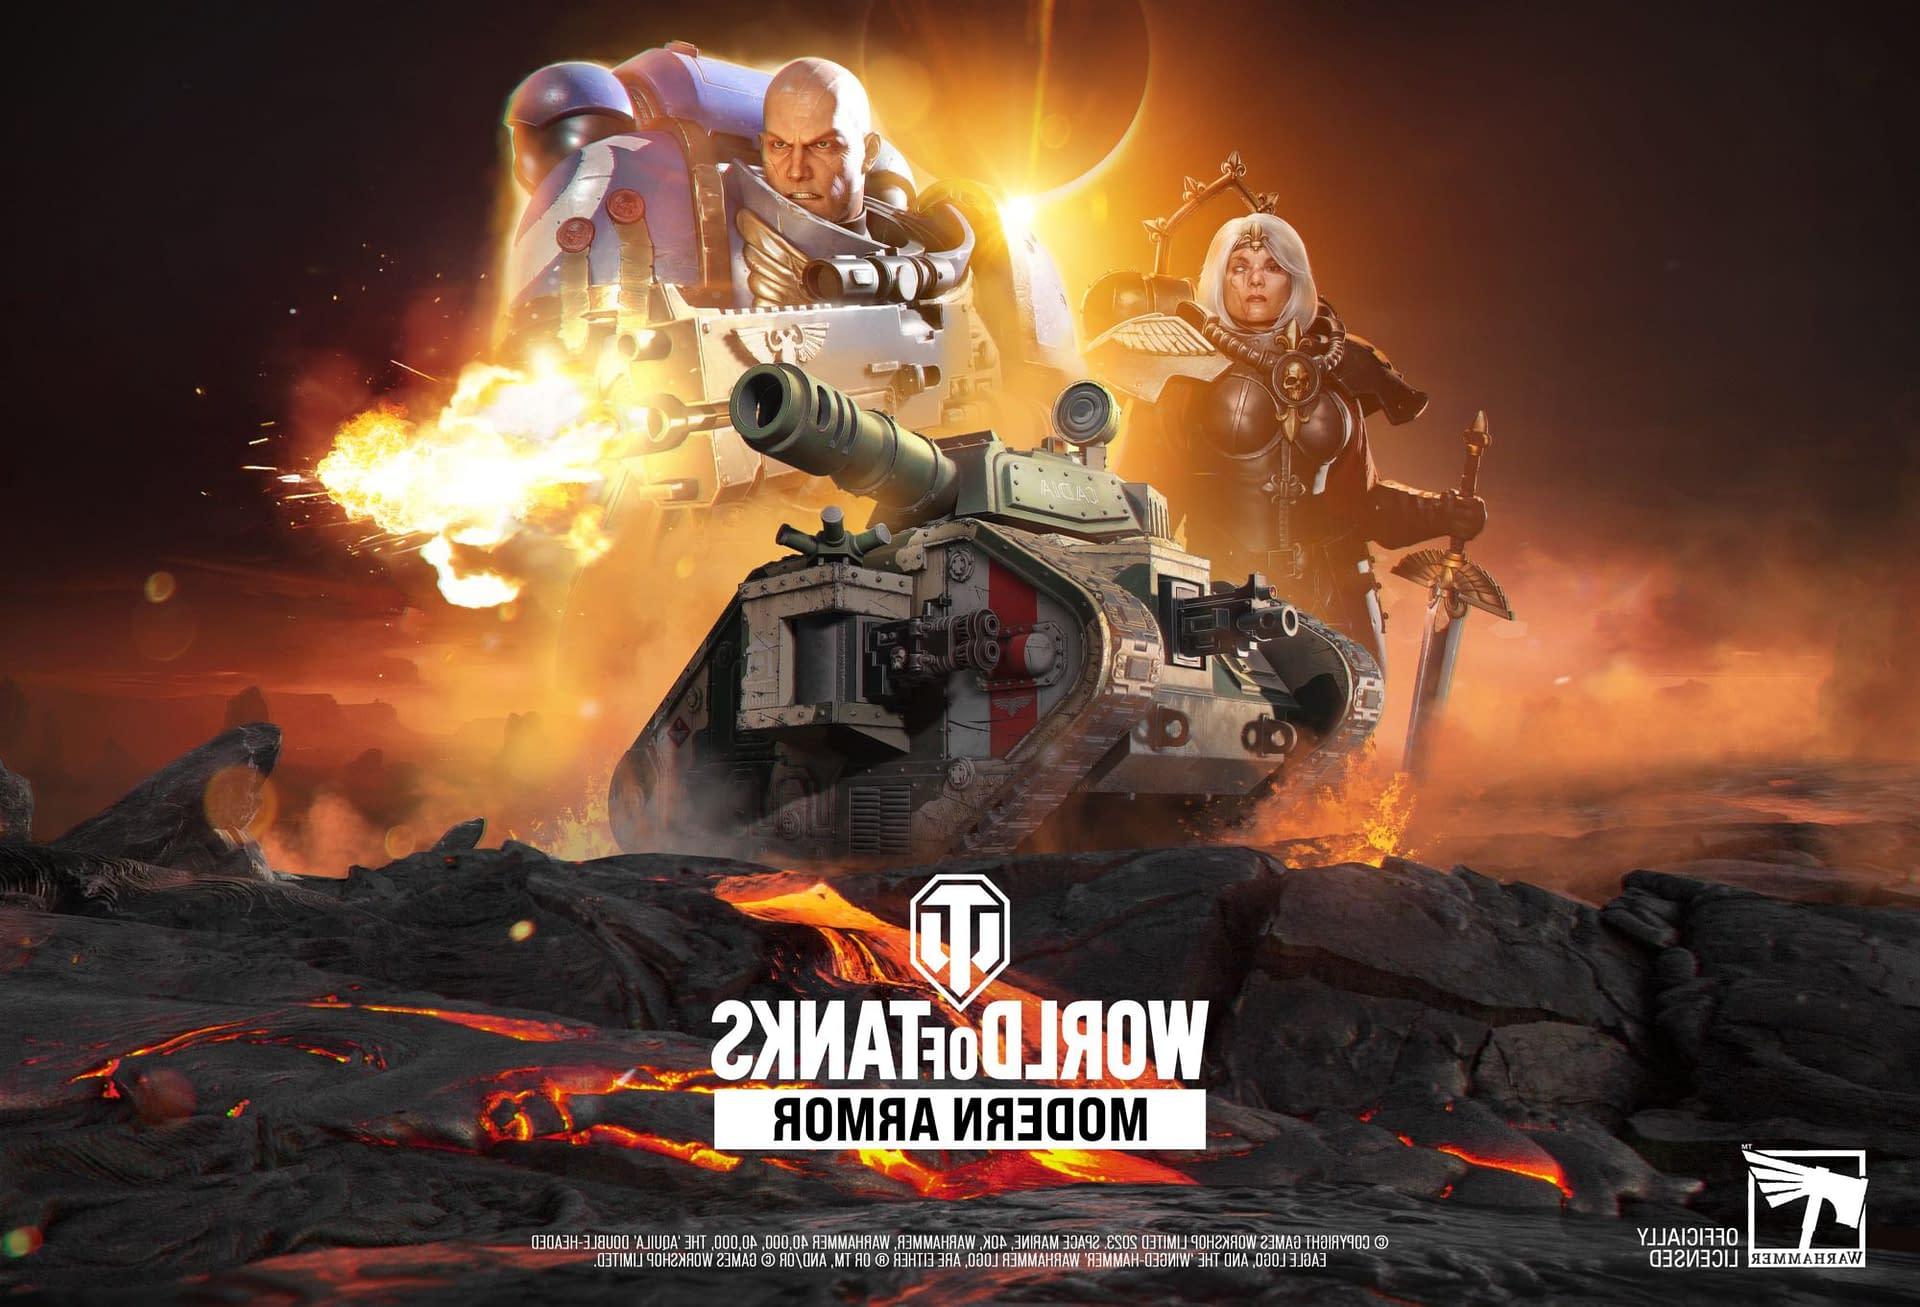 Wargaming revealed an entirely new crossover event during the world's massive expansion of Warhammer 40,000 has crashed into the Modern Armor of the World. The team will hold a special event from the second of May until the second.